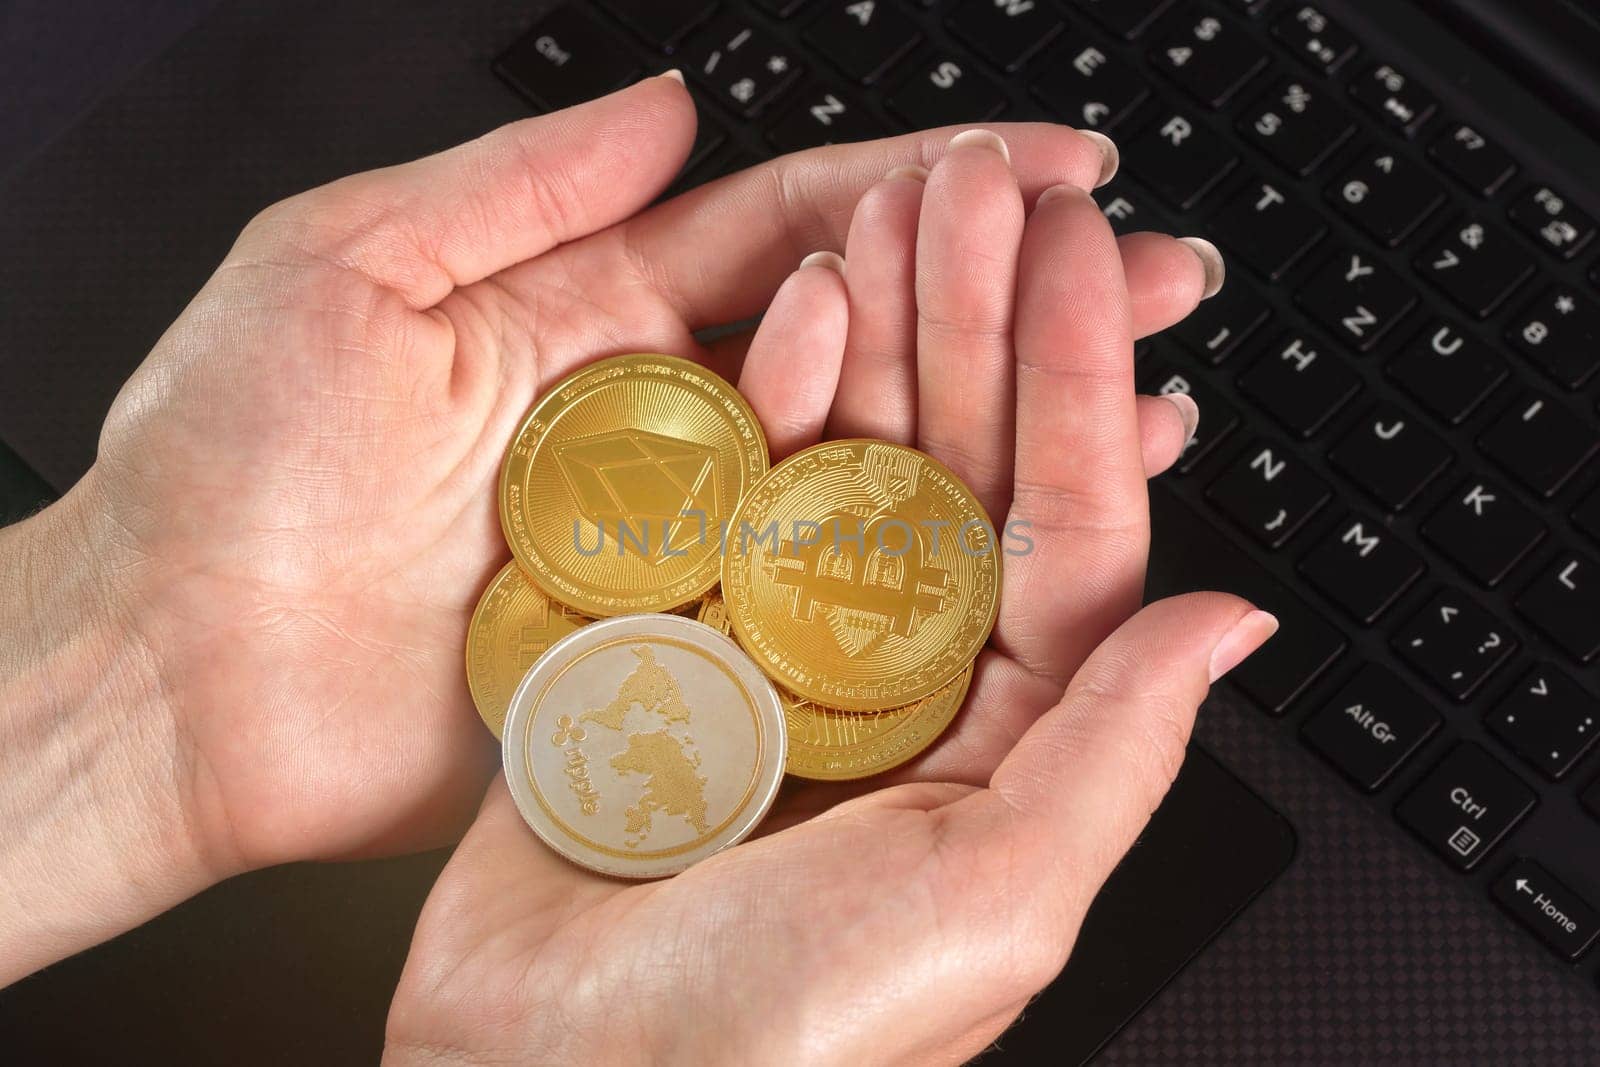 Woman hands holding golden coloured bitcoin, ripple and ethereum cryptocurrency coins over black laptop keyboard by Ivanko